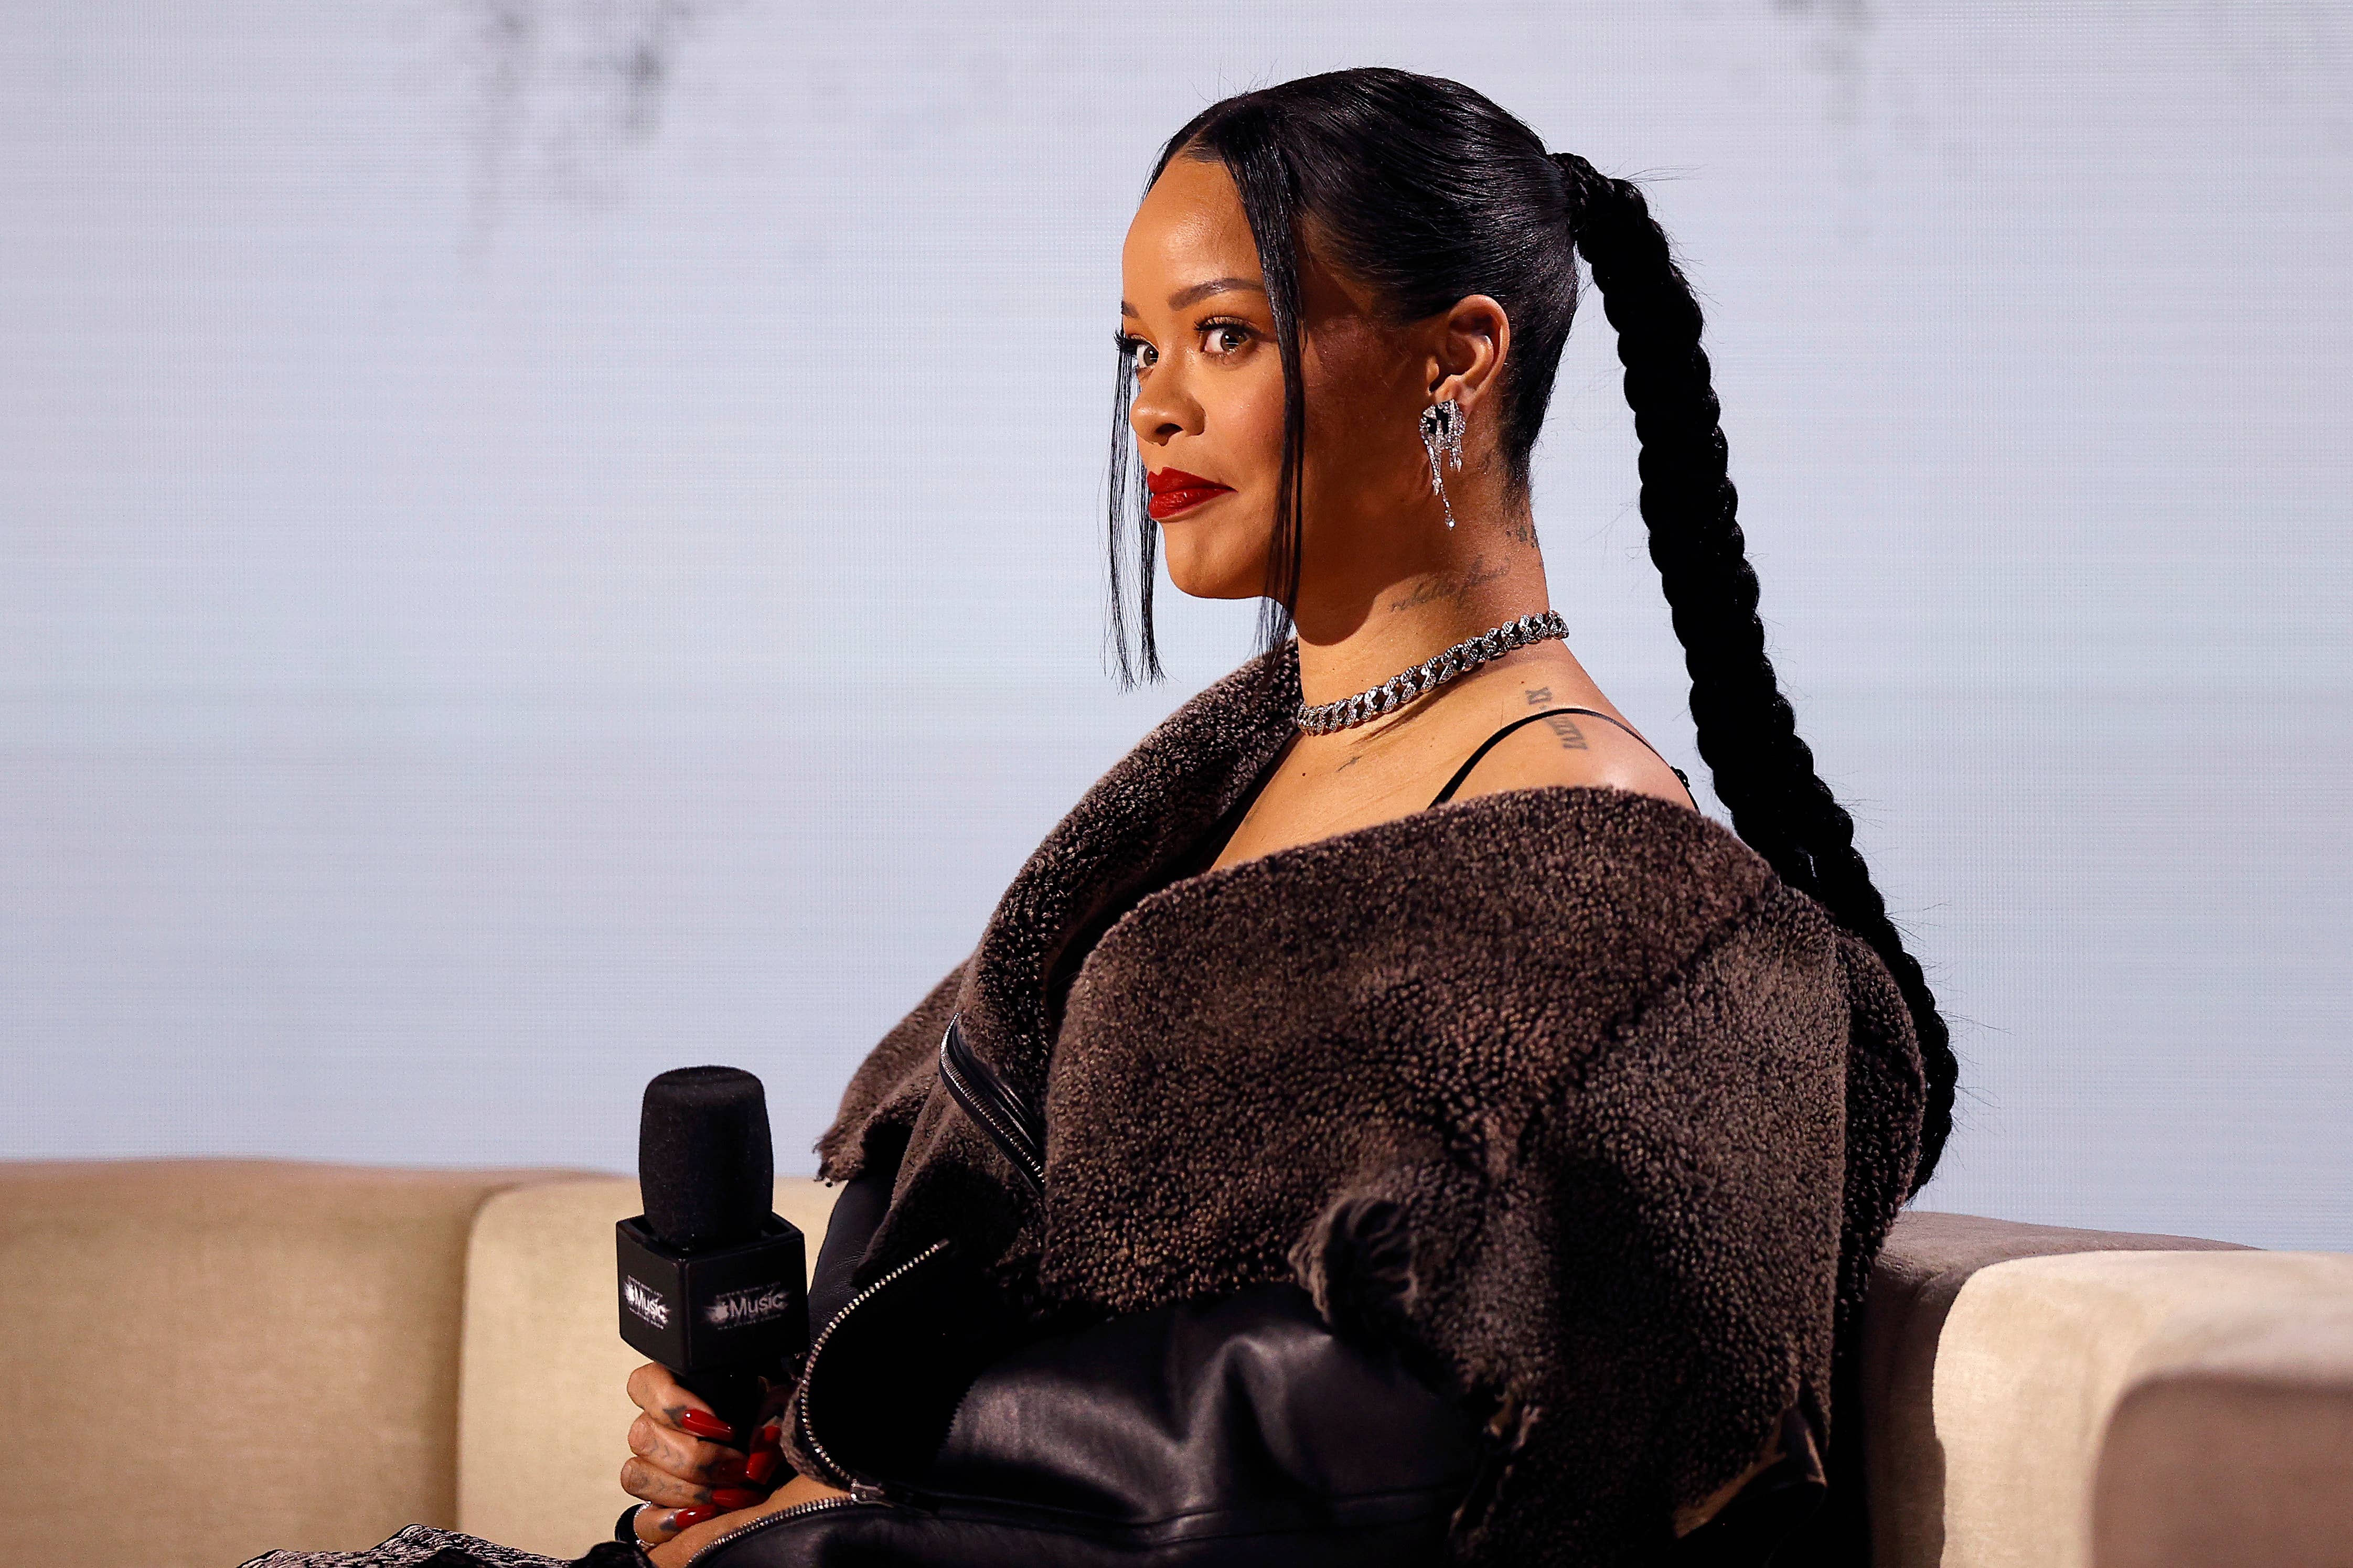 Never Say Never: Why Rihanna Had a Change of Heart About the Super